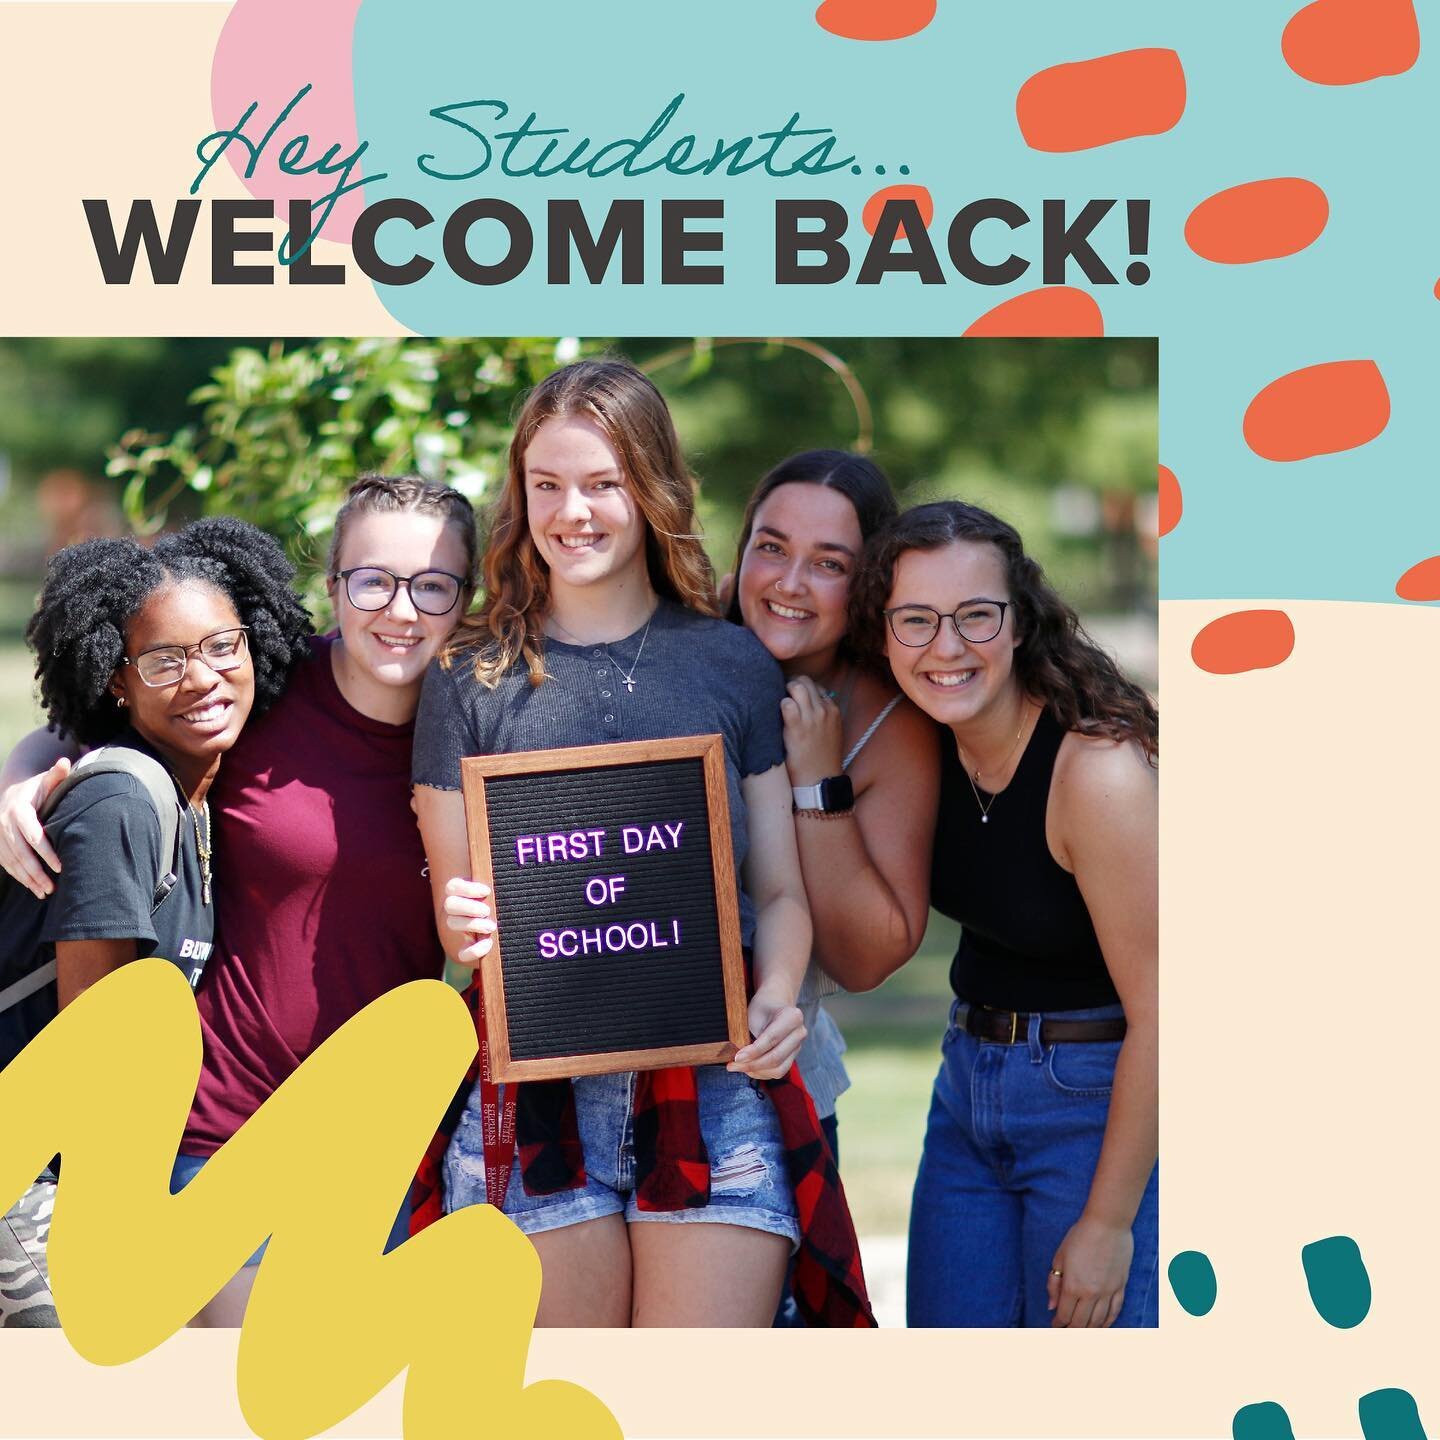 Students, summer may be over, but 👏🏼WE&rsquo;VE 👏🏼 MISSED 👏🏼YOU 

We&rsquo;re ready to have some fun and hope you&rsquo;ll be there to join us! Keep your eyes open for ALL the shenanigans happening soon 🤩